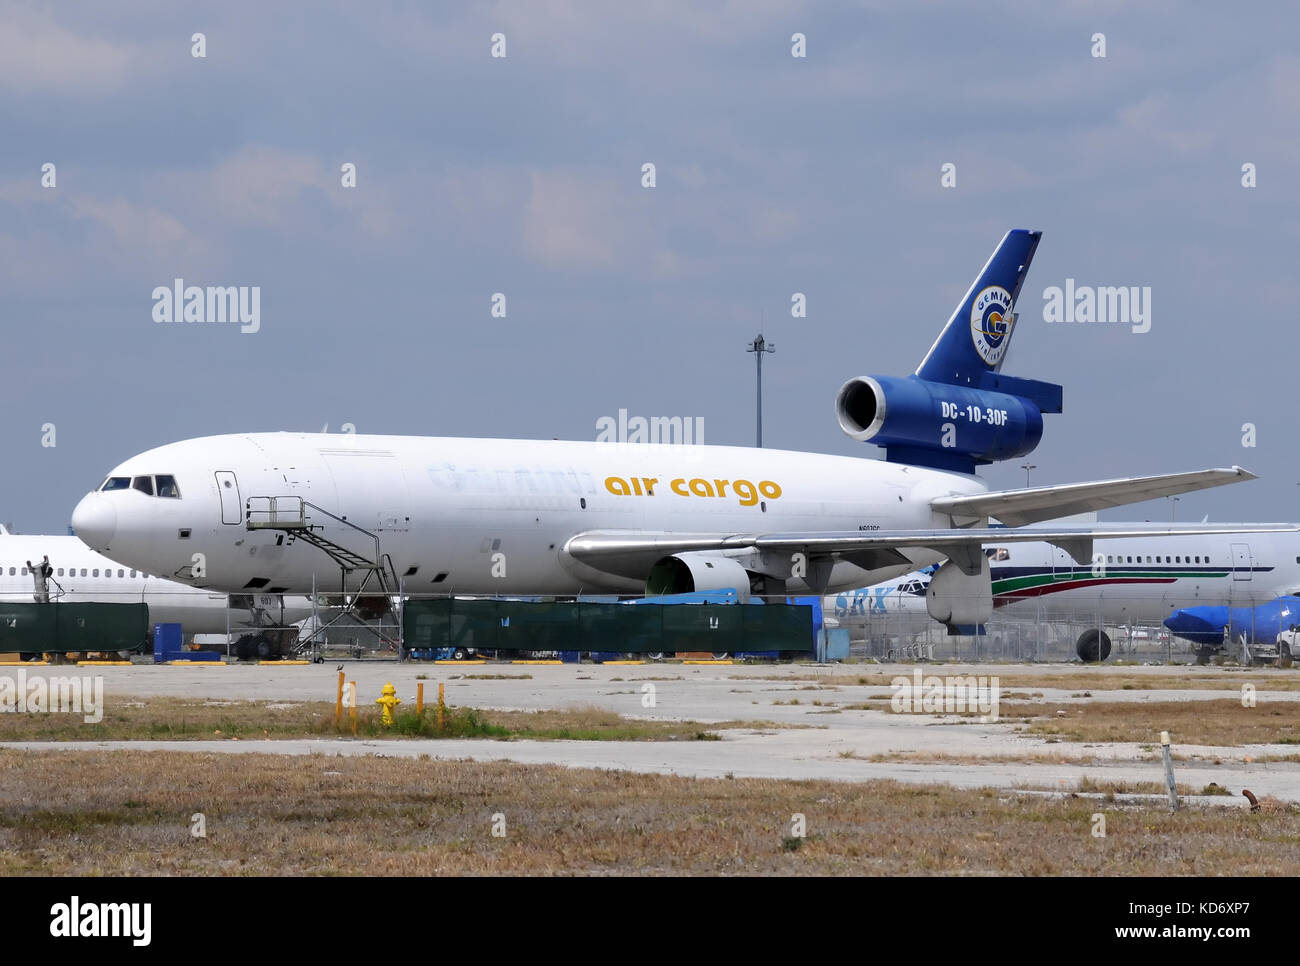 Miami, USA - March 20, 2011: Retired DC-10 cargo jet parked to be dismantled for scrap metal. Many old airplane end up at Miami's Opa Locka airport wh Stock Photo